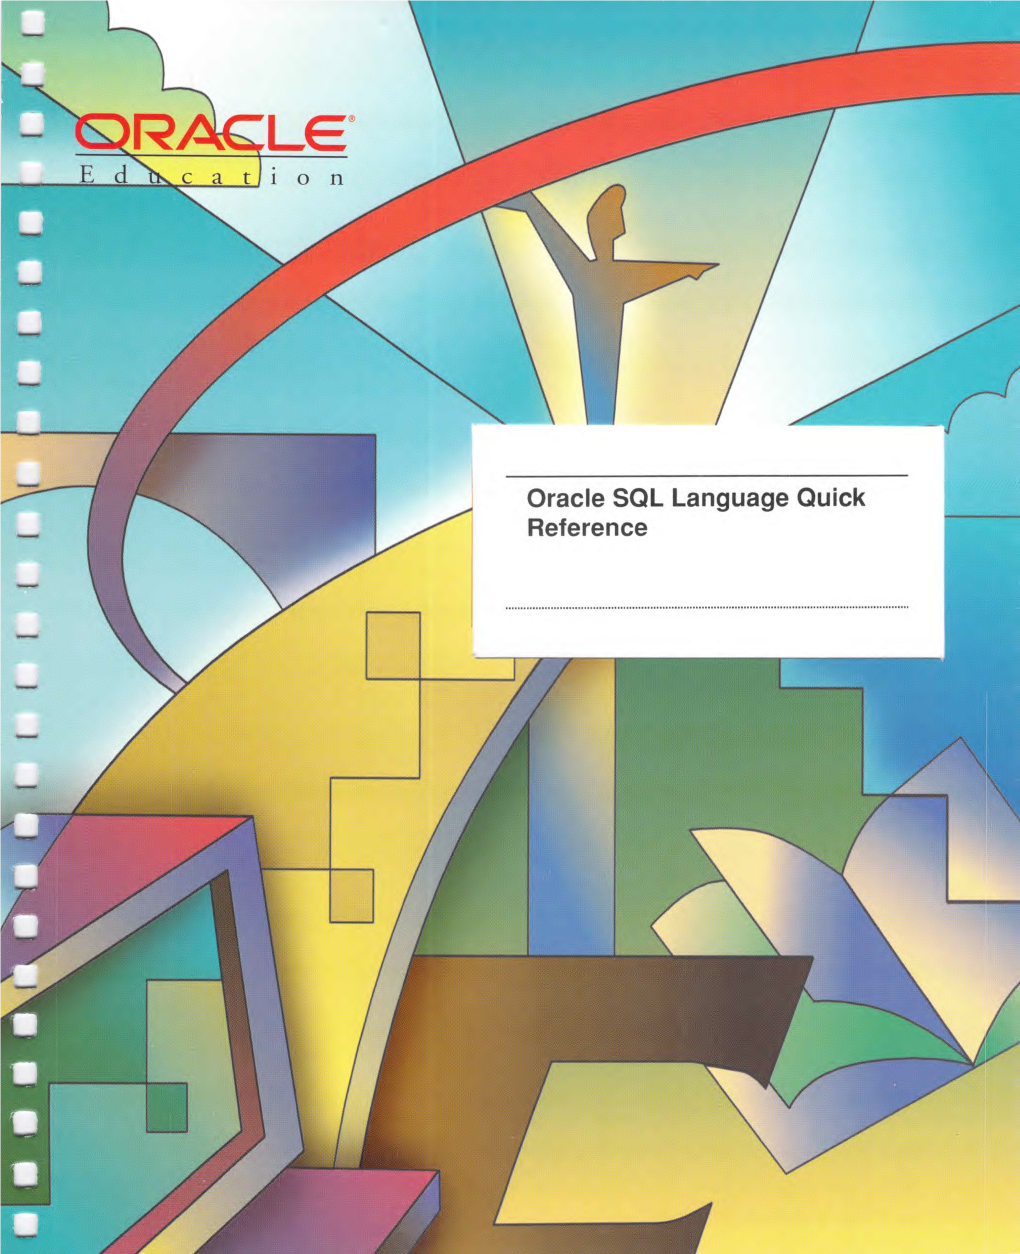 Oracle SQL Language Quick Reference